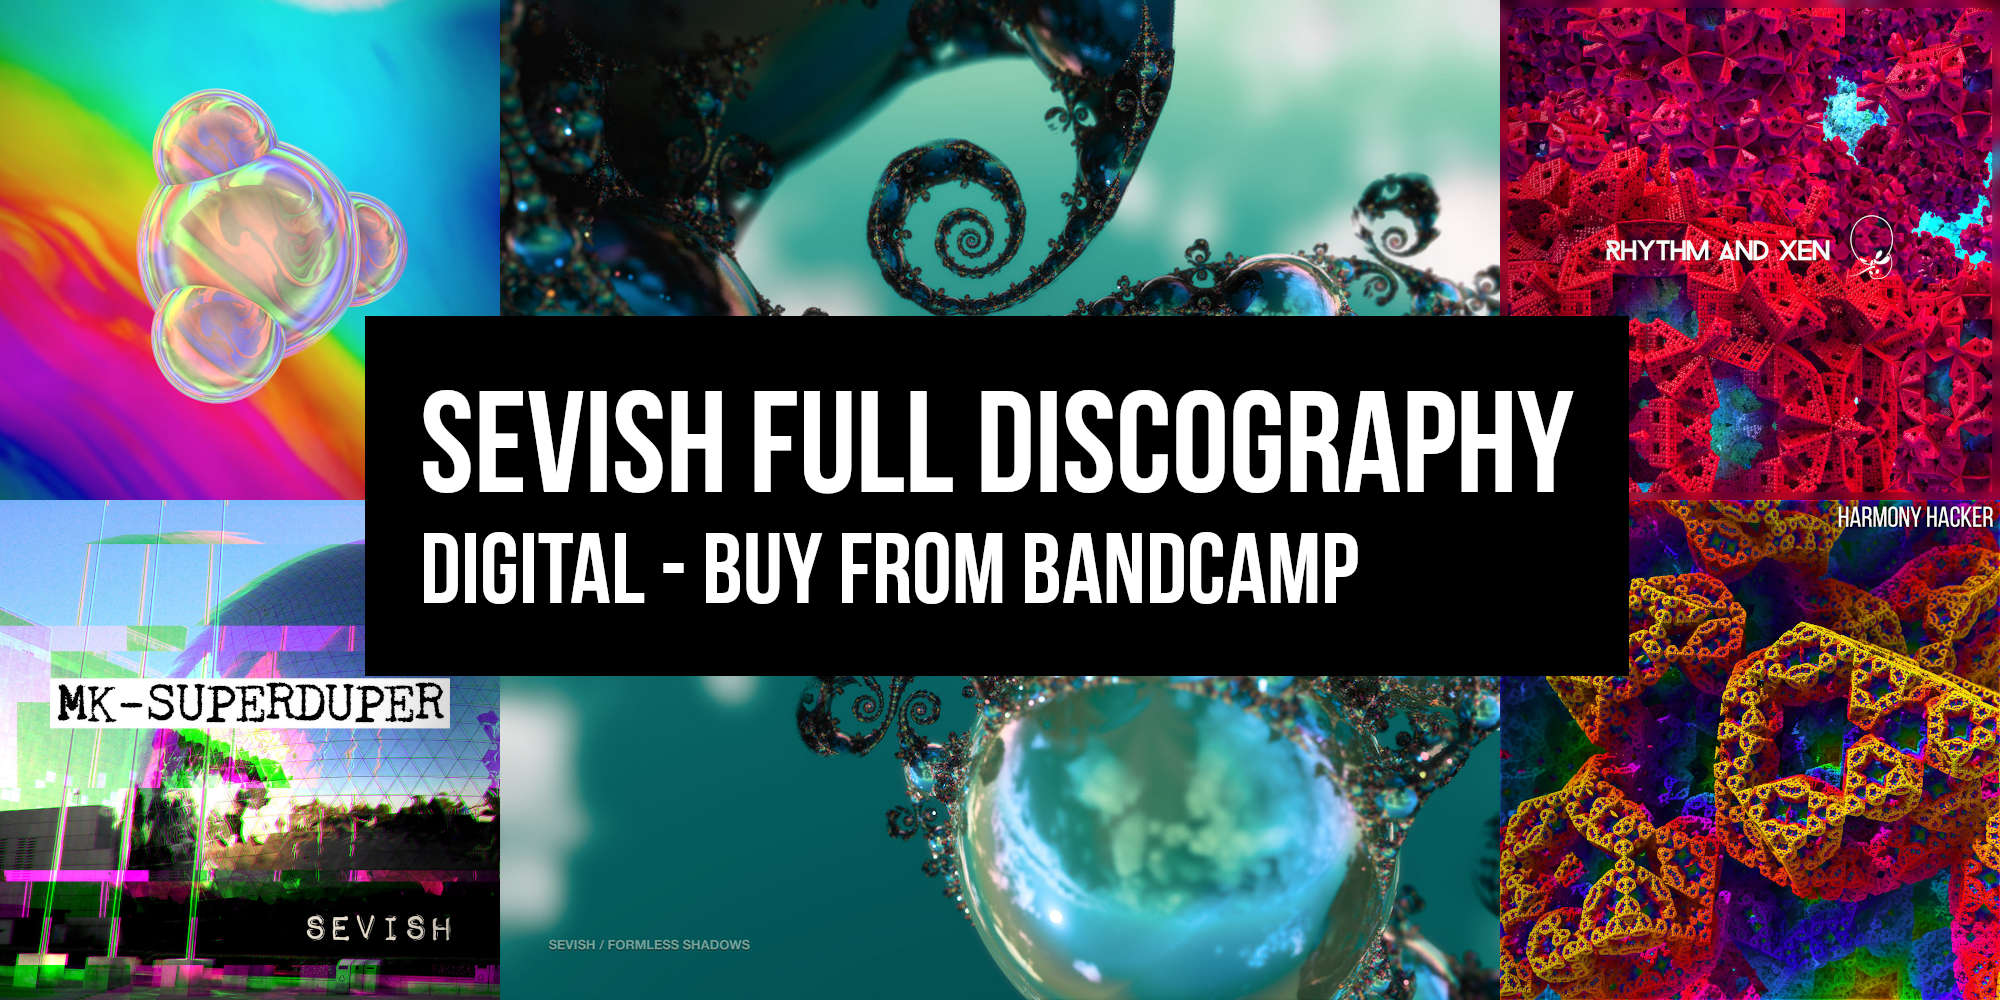 Download Sevish's discography from Bandcamp